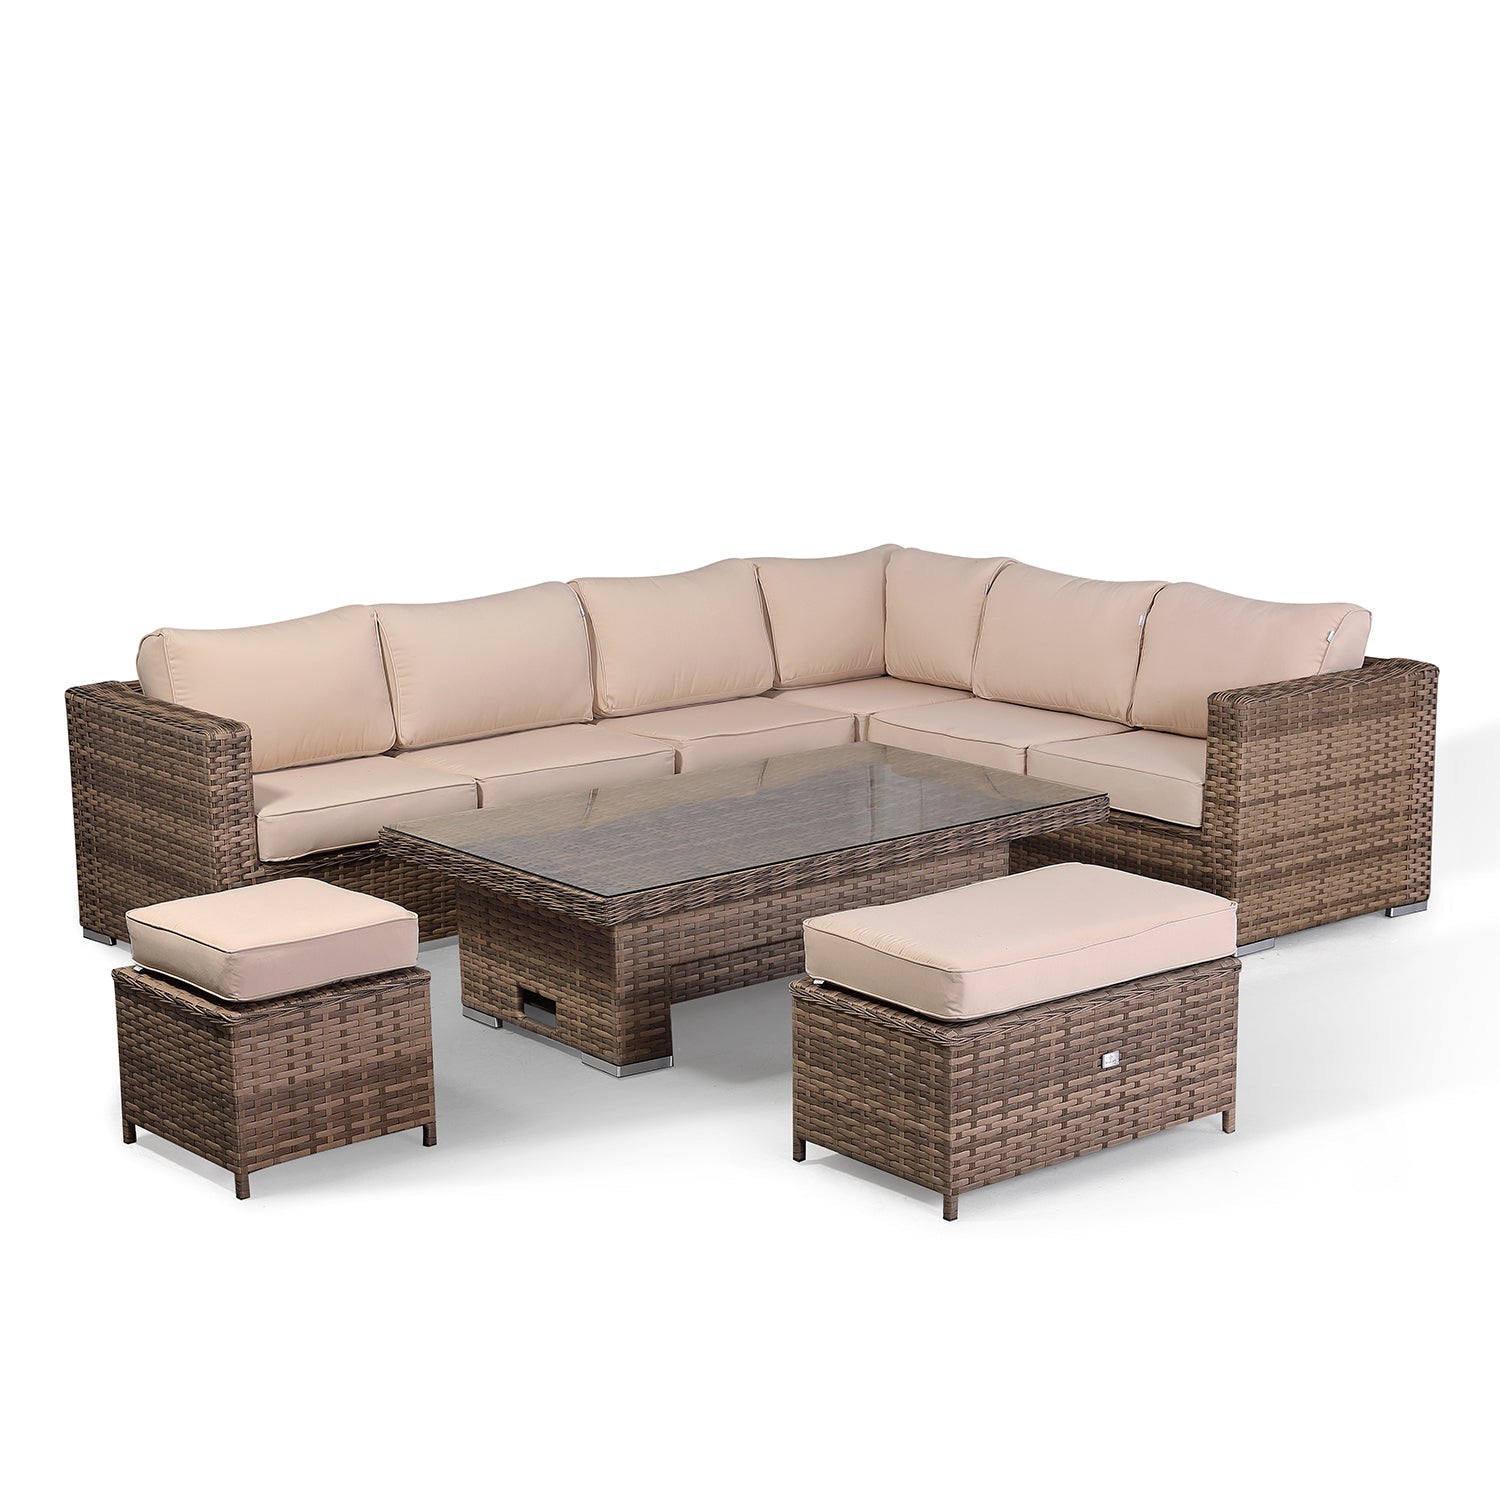 Durley MODULAR Corner with Rising Table in Brown weave and Beige Cushions